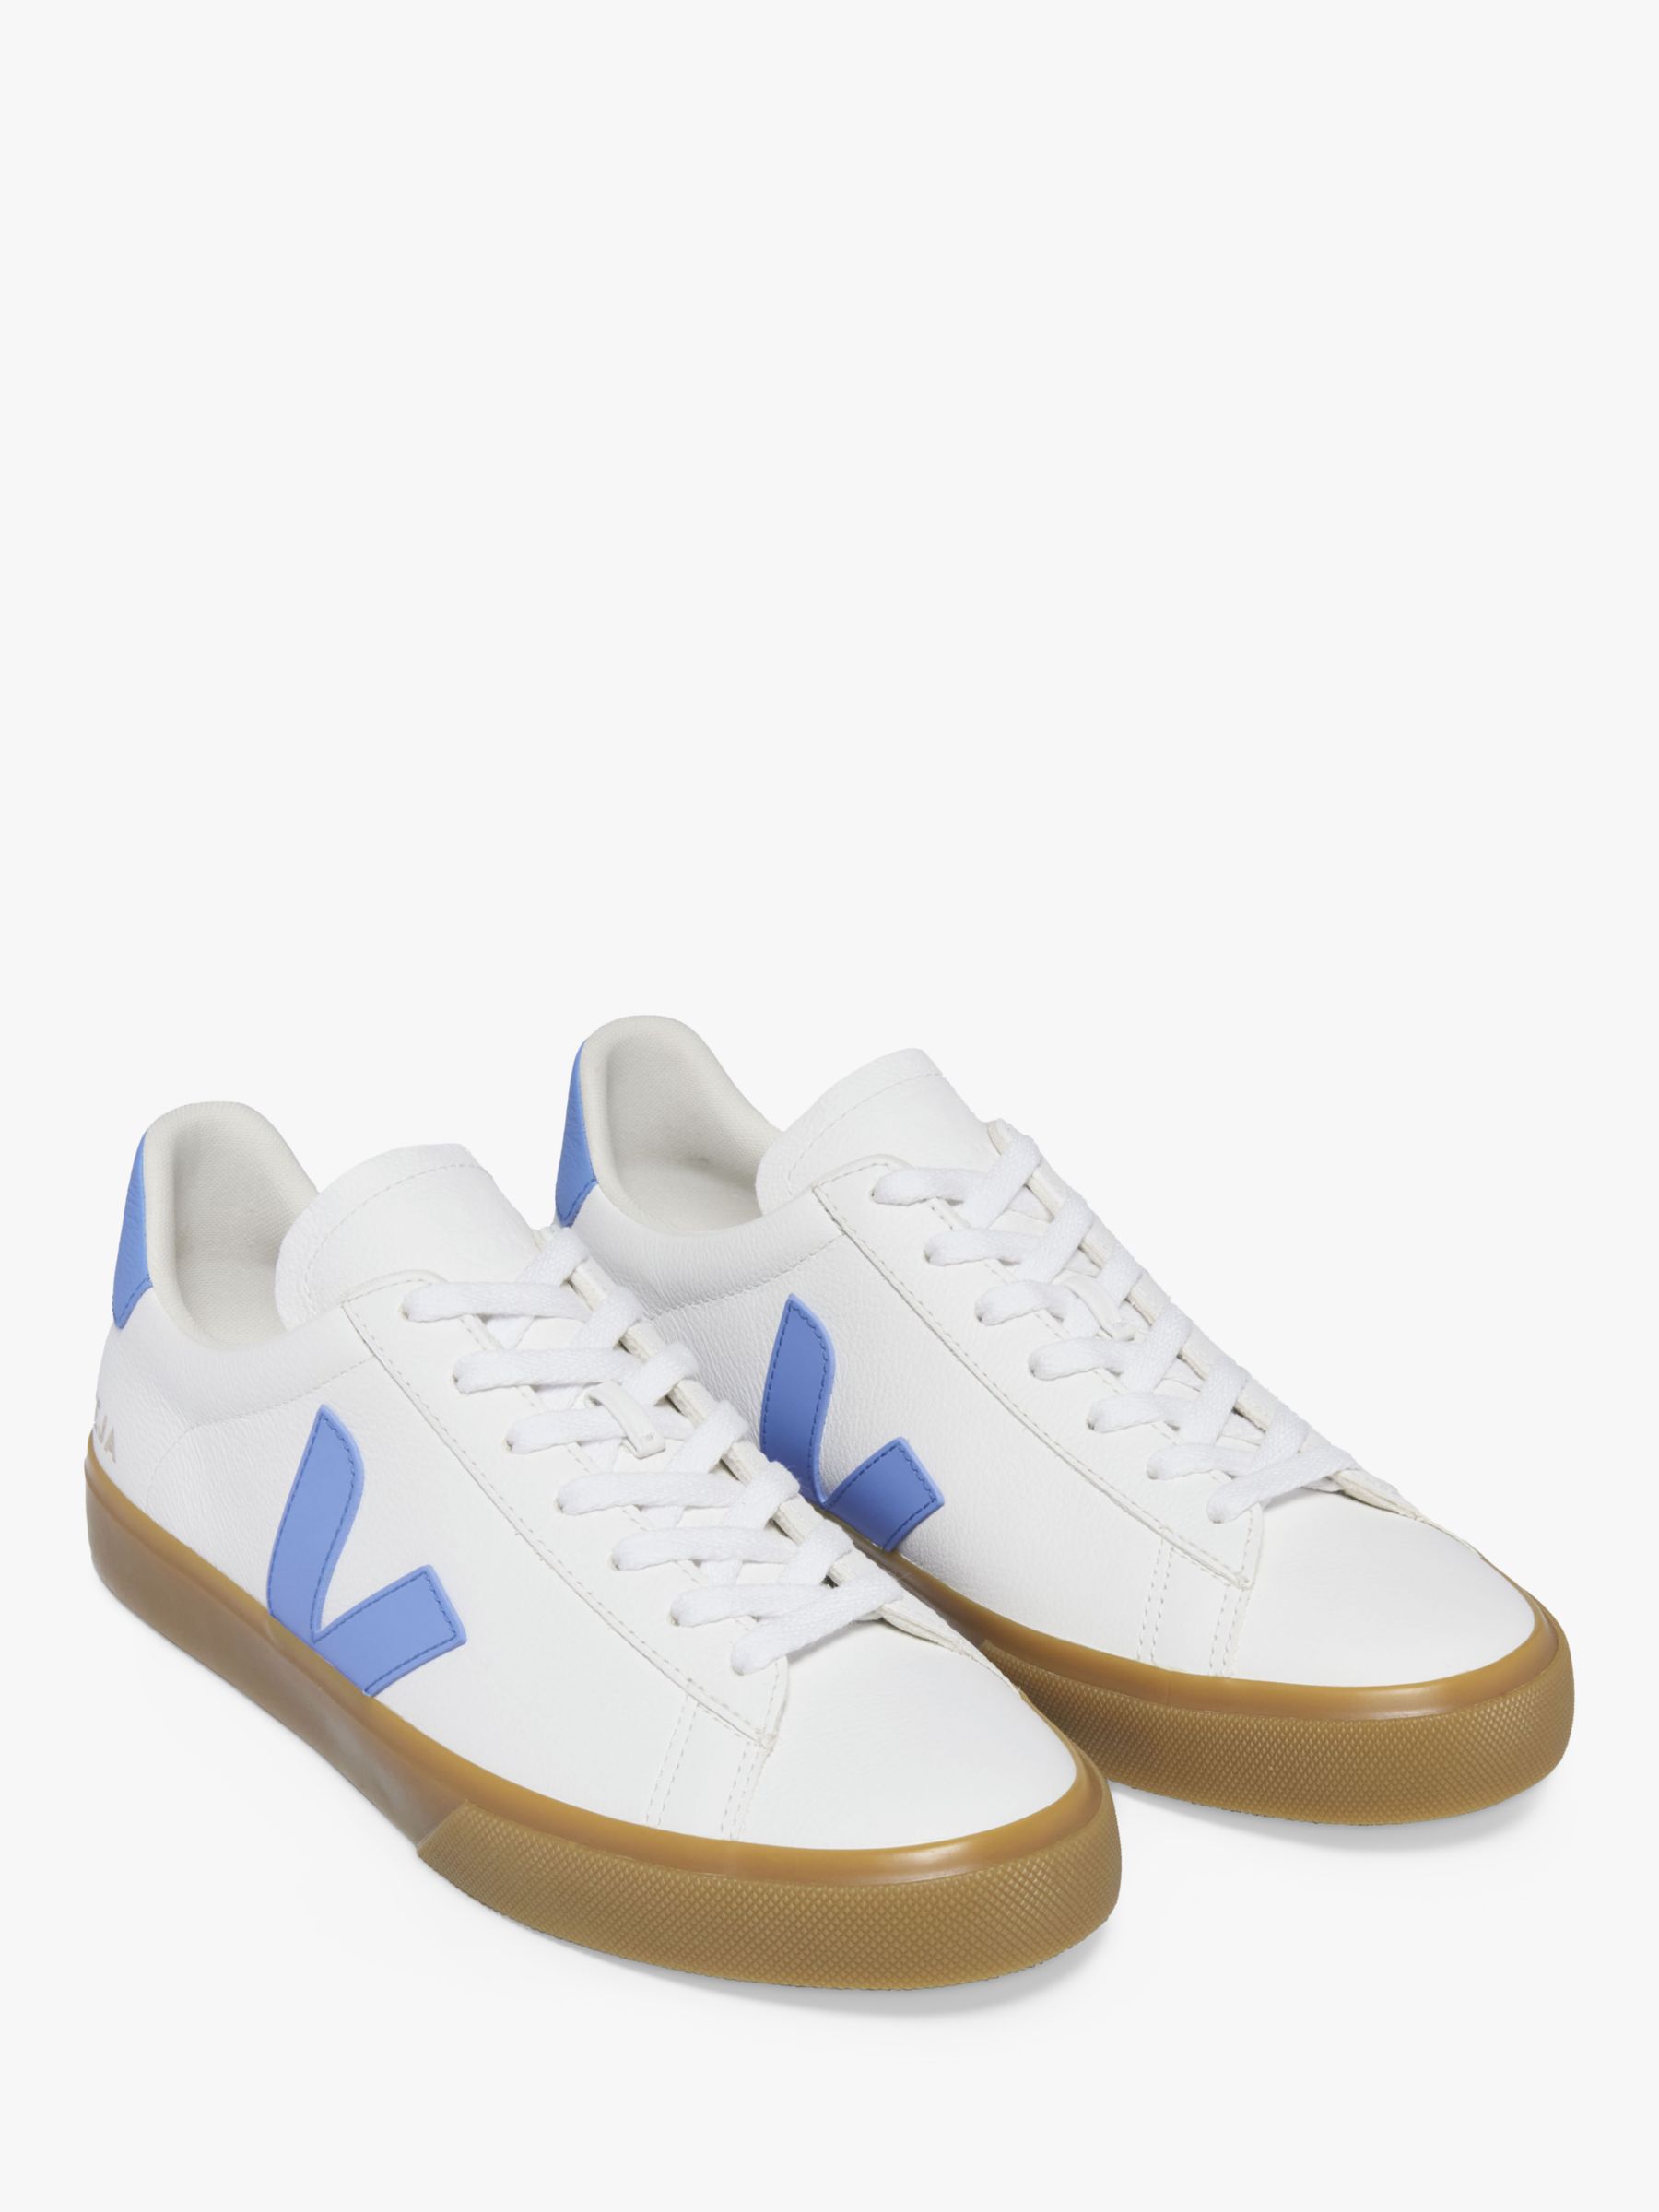 VEJA Campo Leather Contrast Sole Trainers, Extra White/Aqua, 4